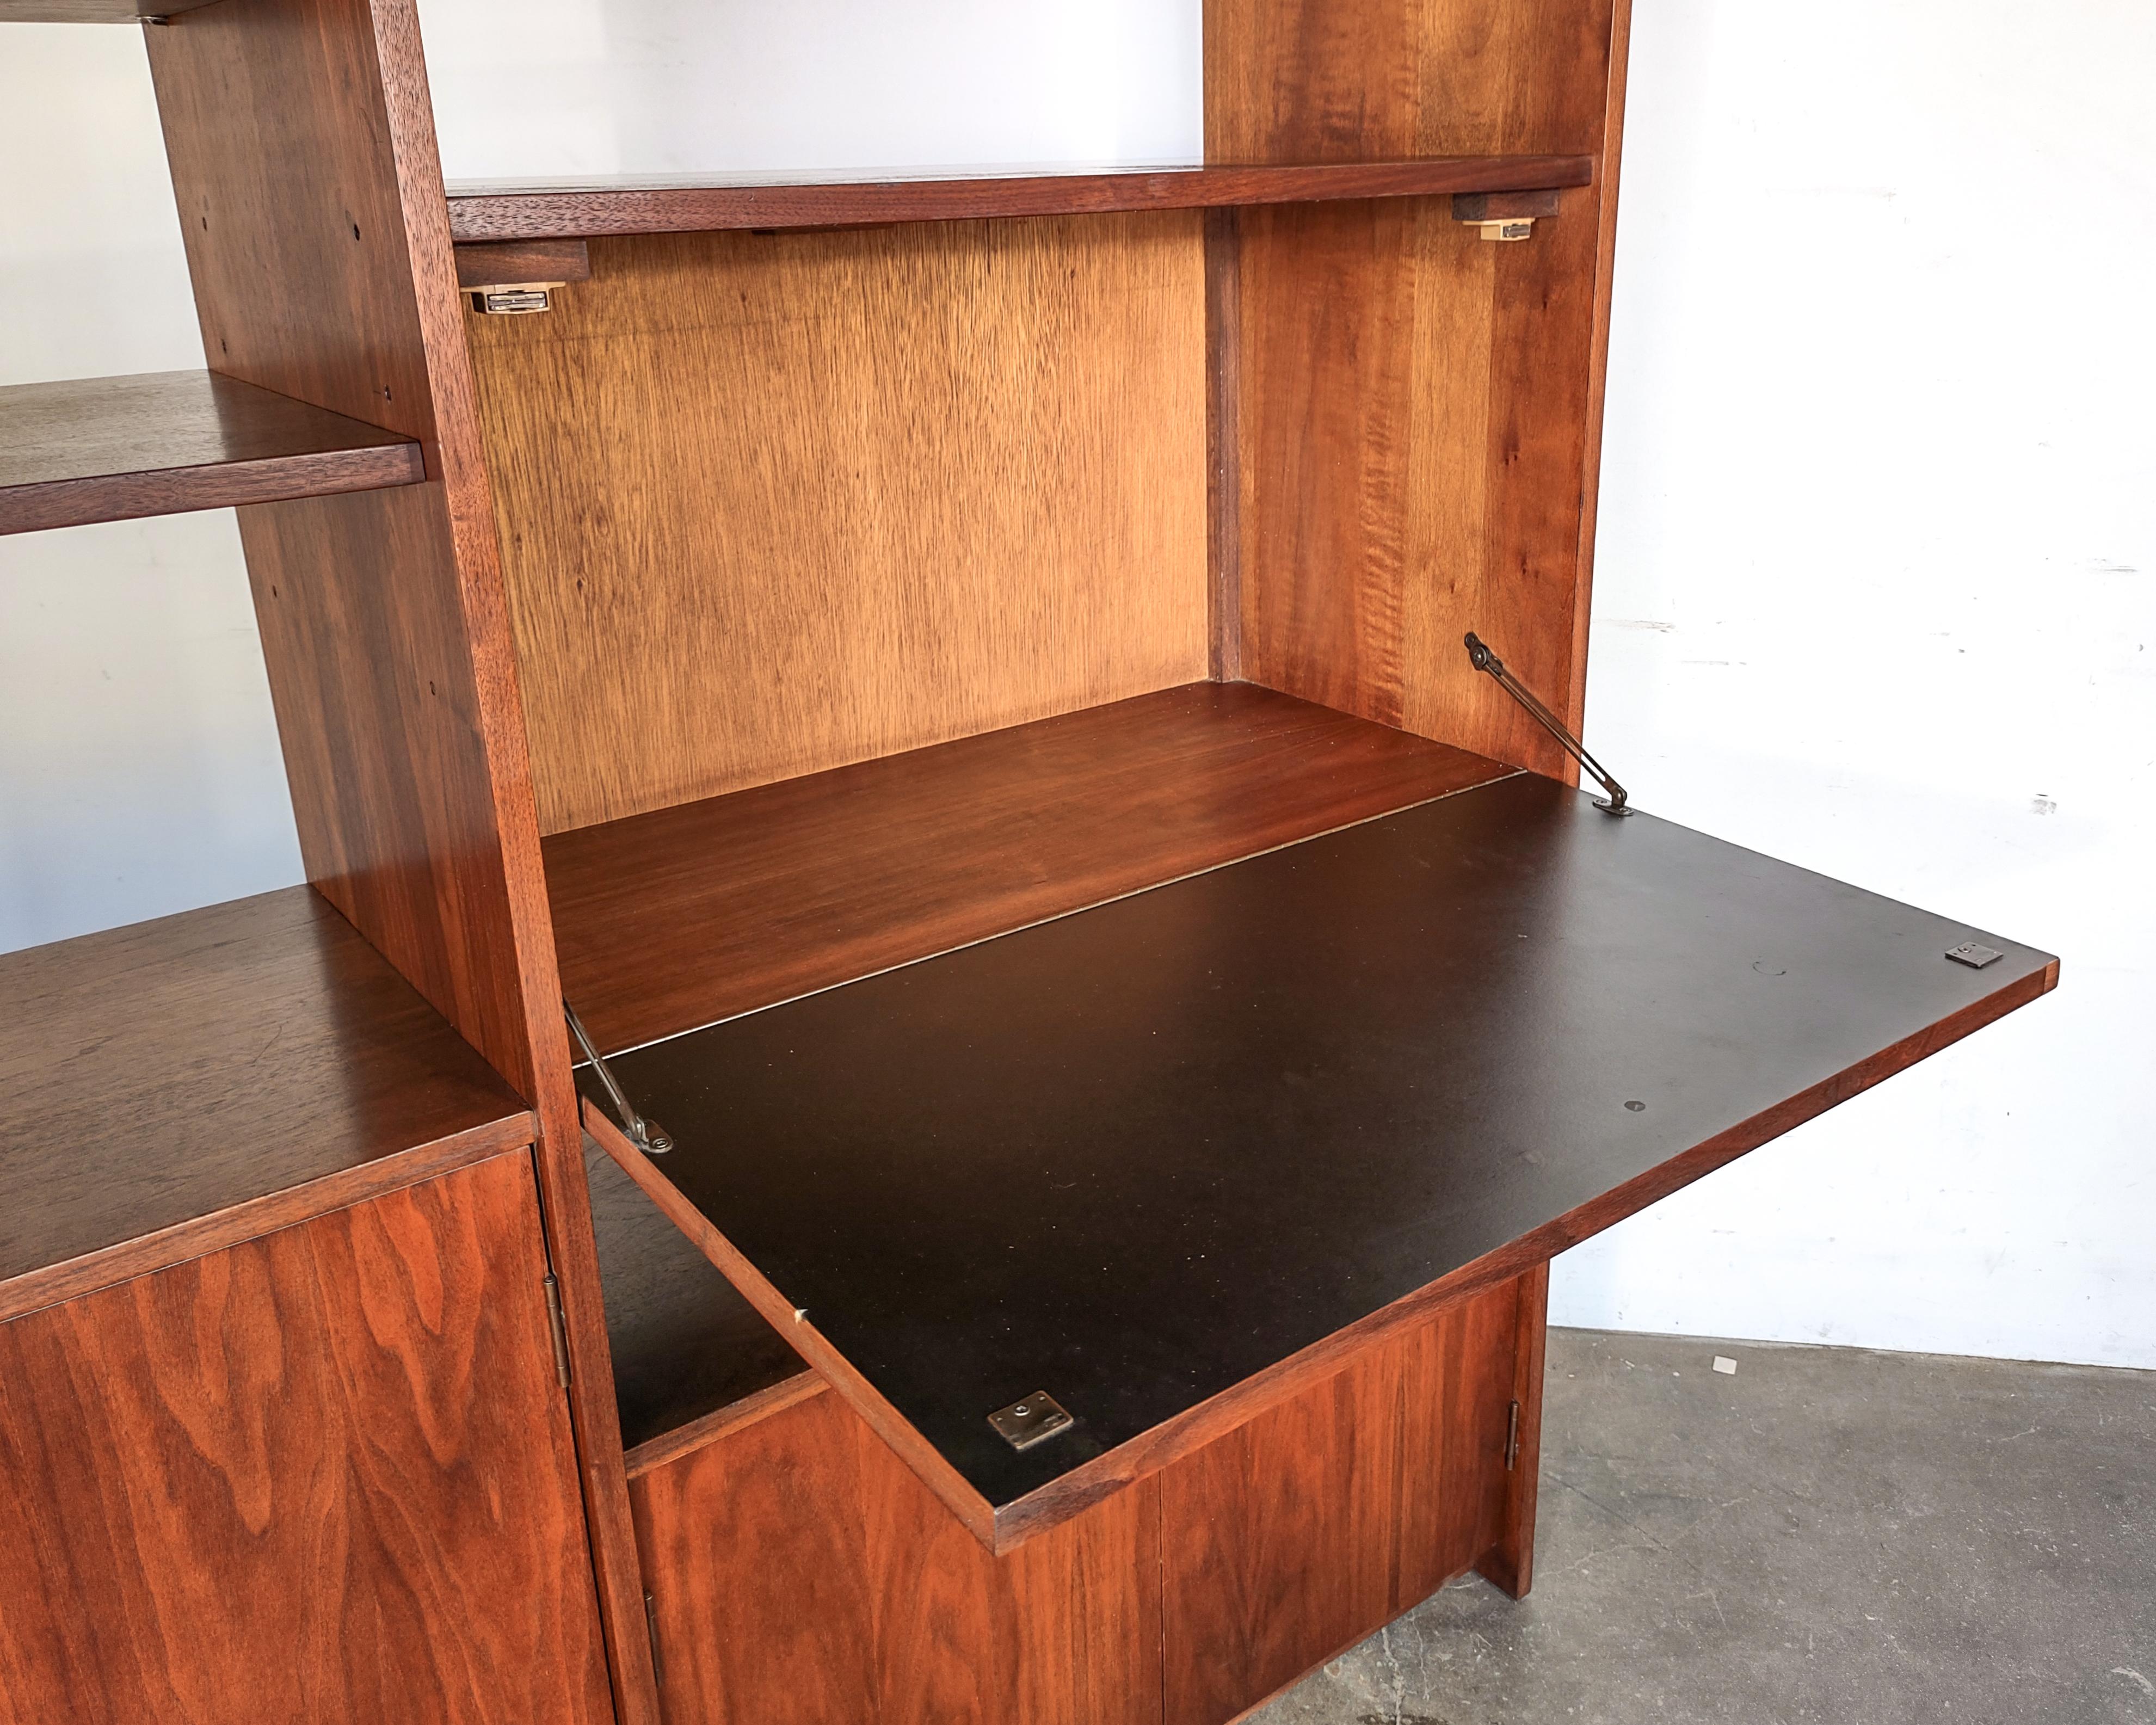 Wood 1960s Mid-Century Modern Walnut Room Divider / Wall Unit with Drop-Down Desk